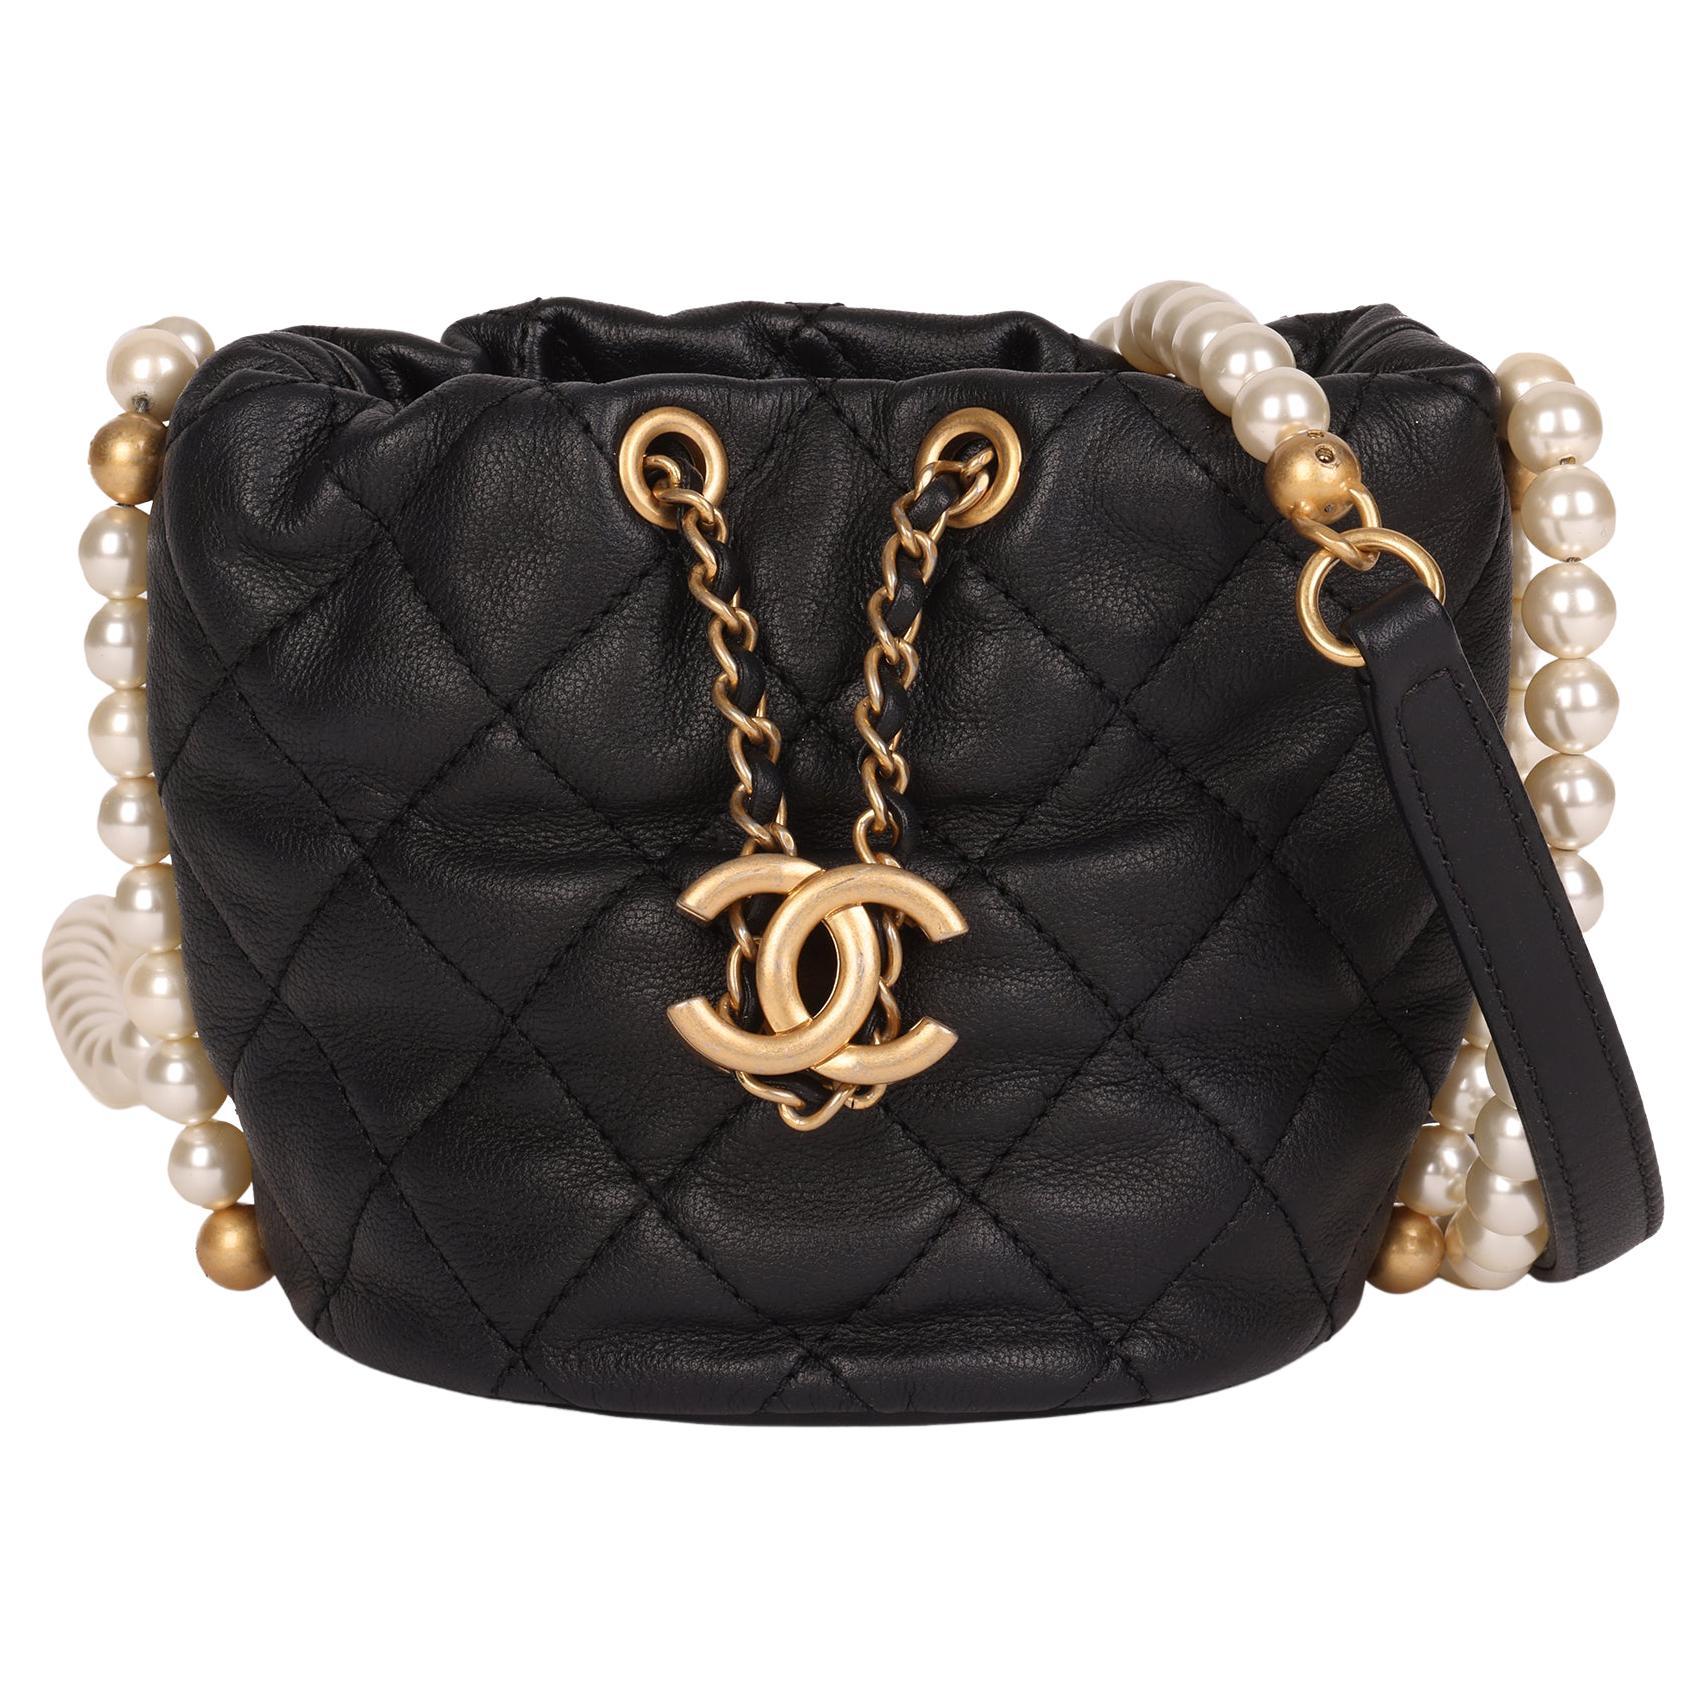 Chanel Black Quilted Calfskin Leather Pearl Micro Bucket Bag at